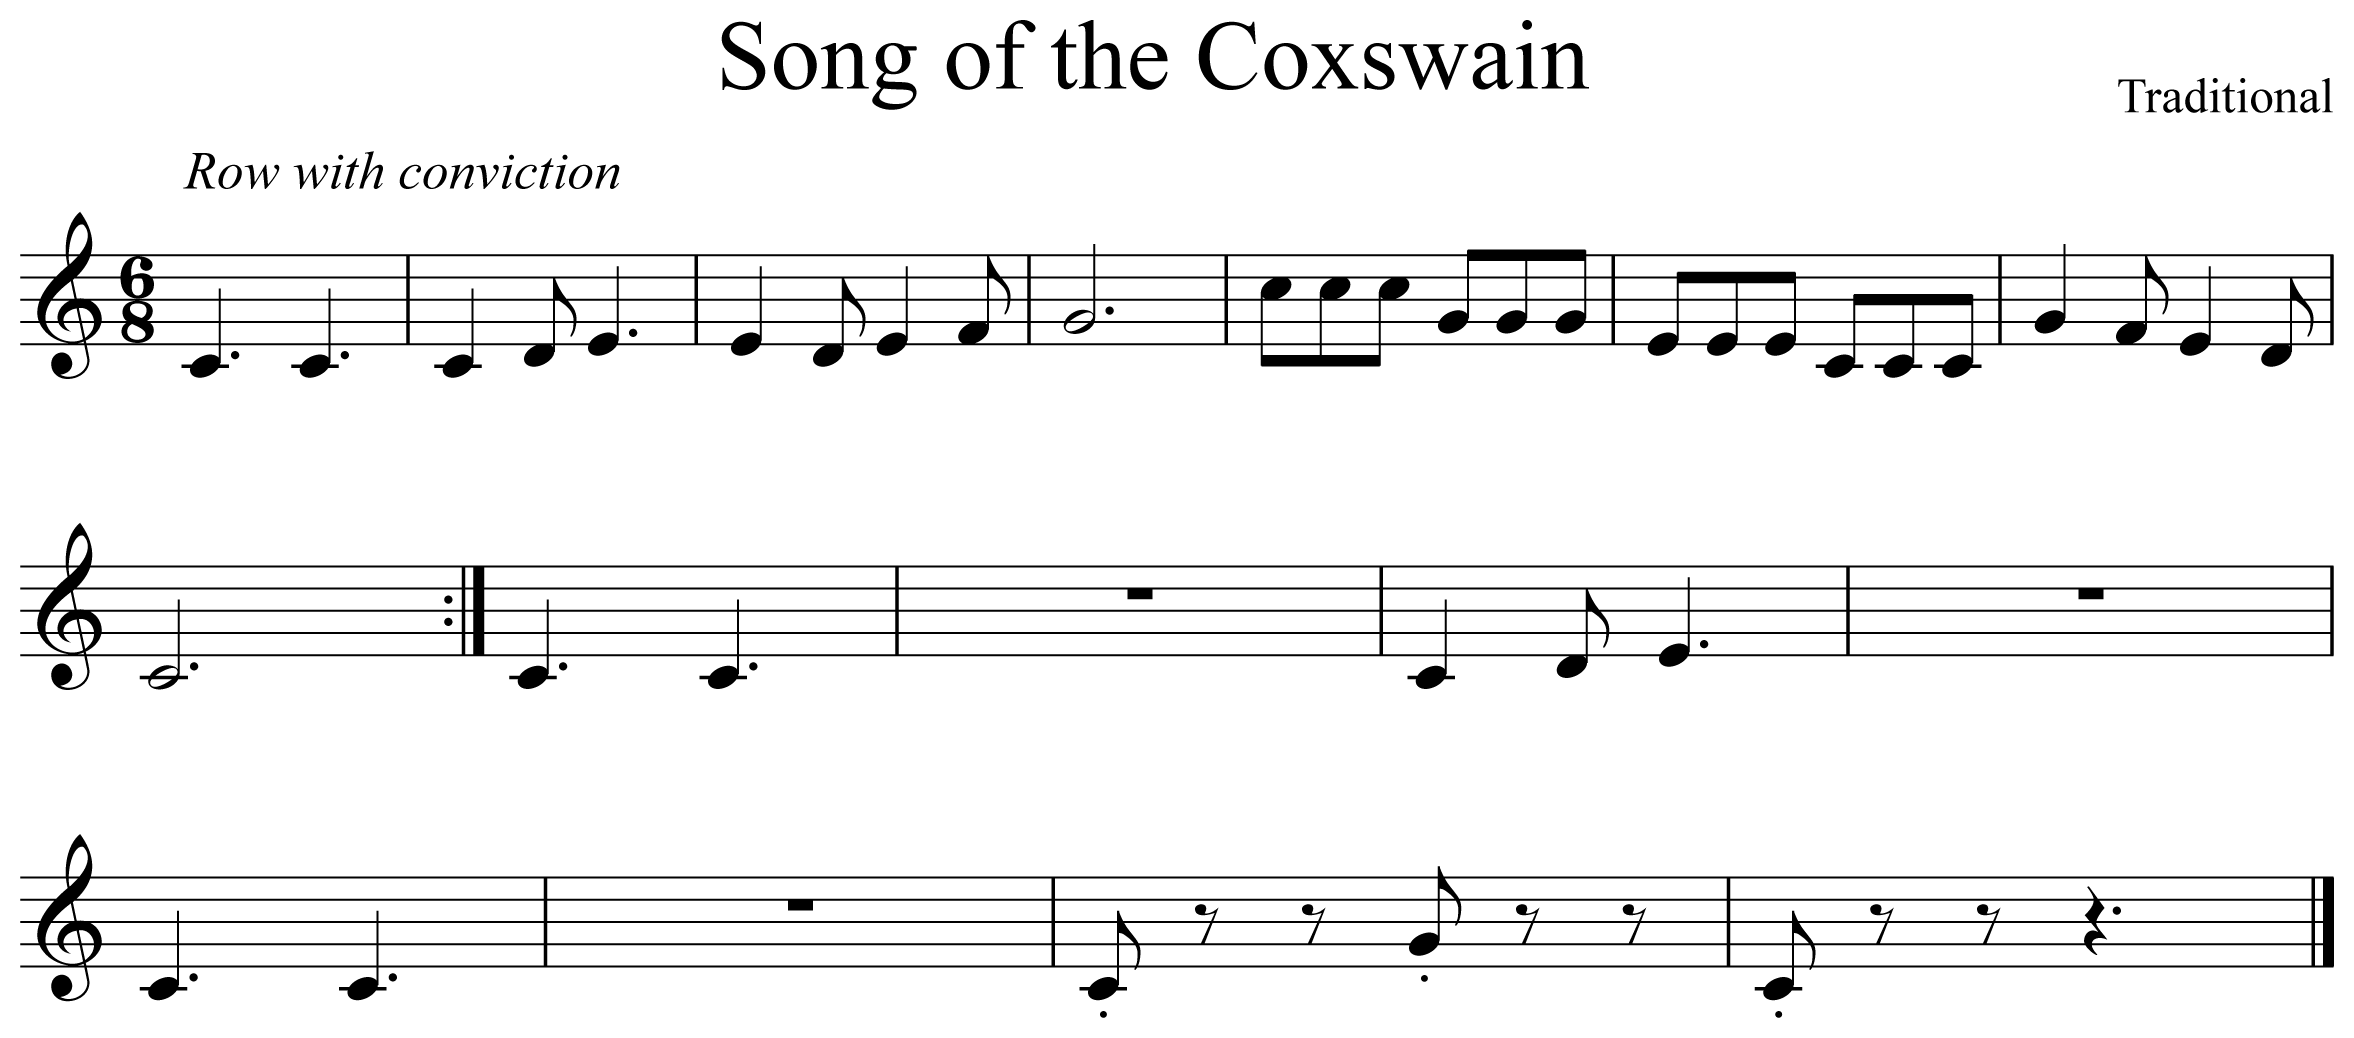 Song of the Coxswain Notation Clarinet